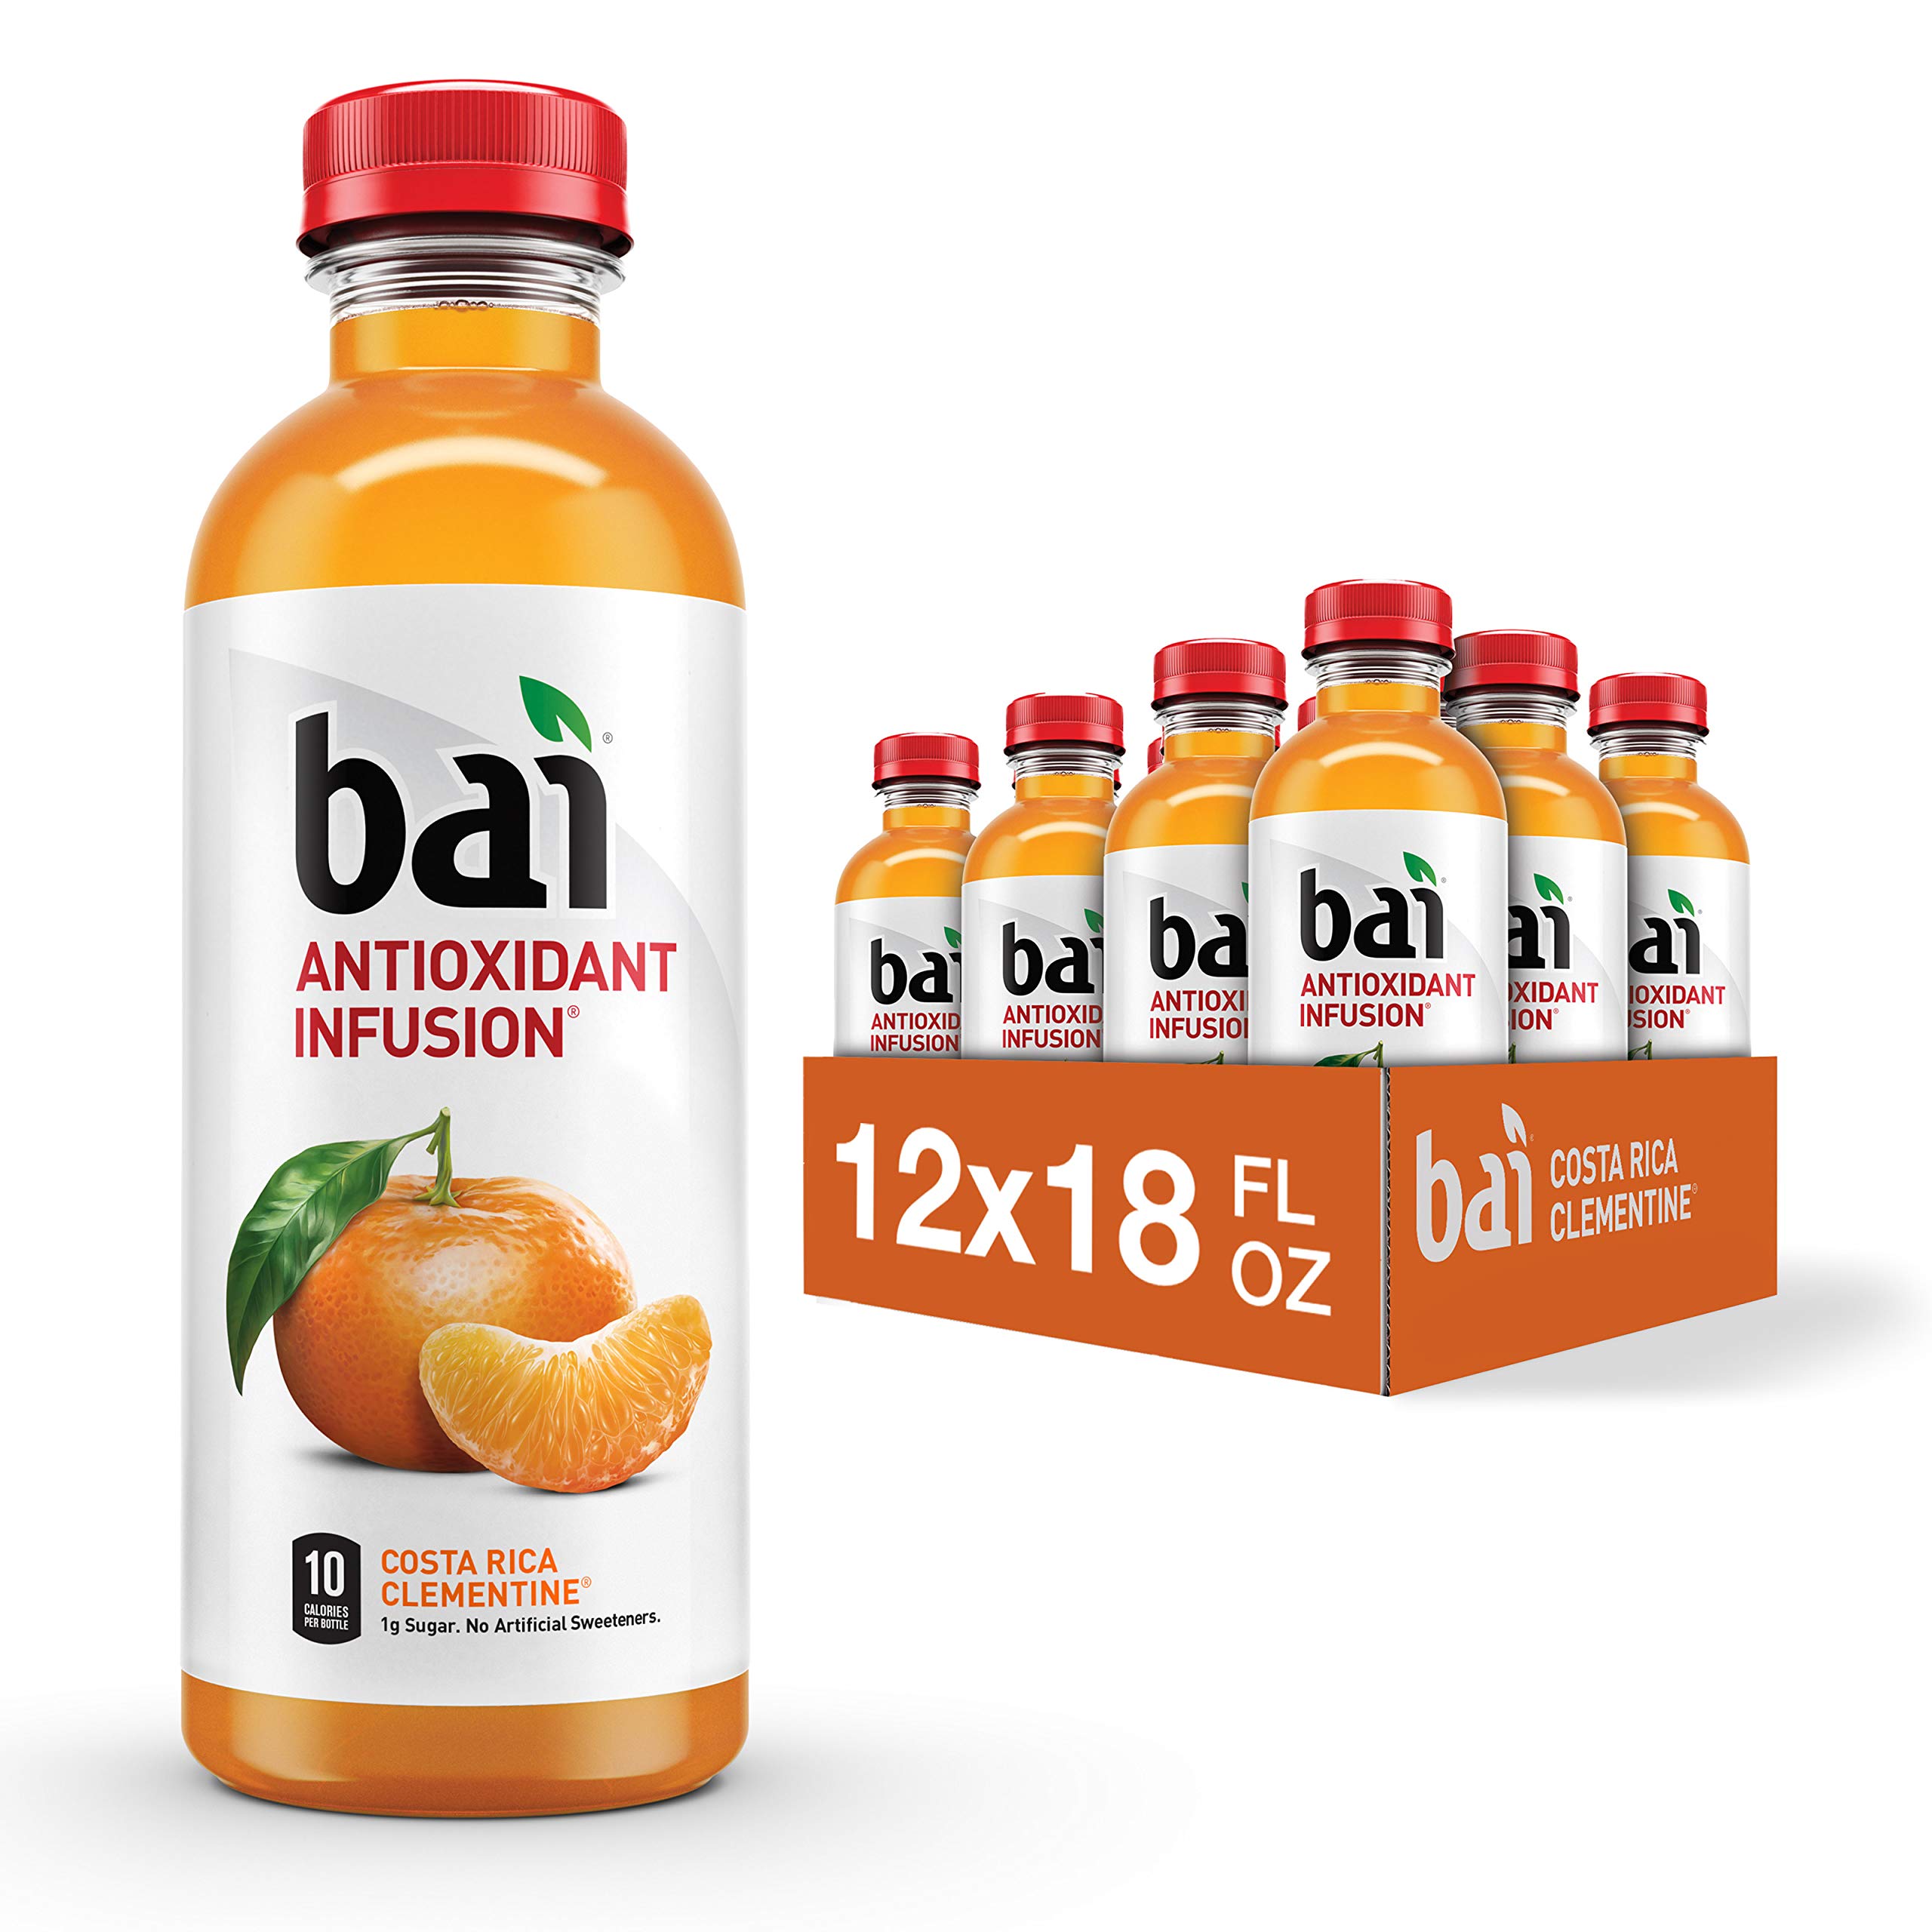 12-Pack 18-Oz Bai Antioxidant Infused Water (Costa Rica Clementine) $14.68 + Free Shipping w/ Prime or on orders over $35